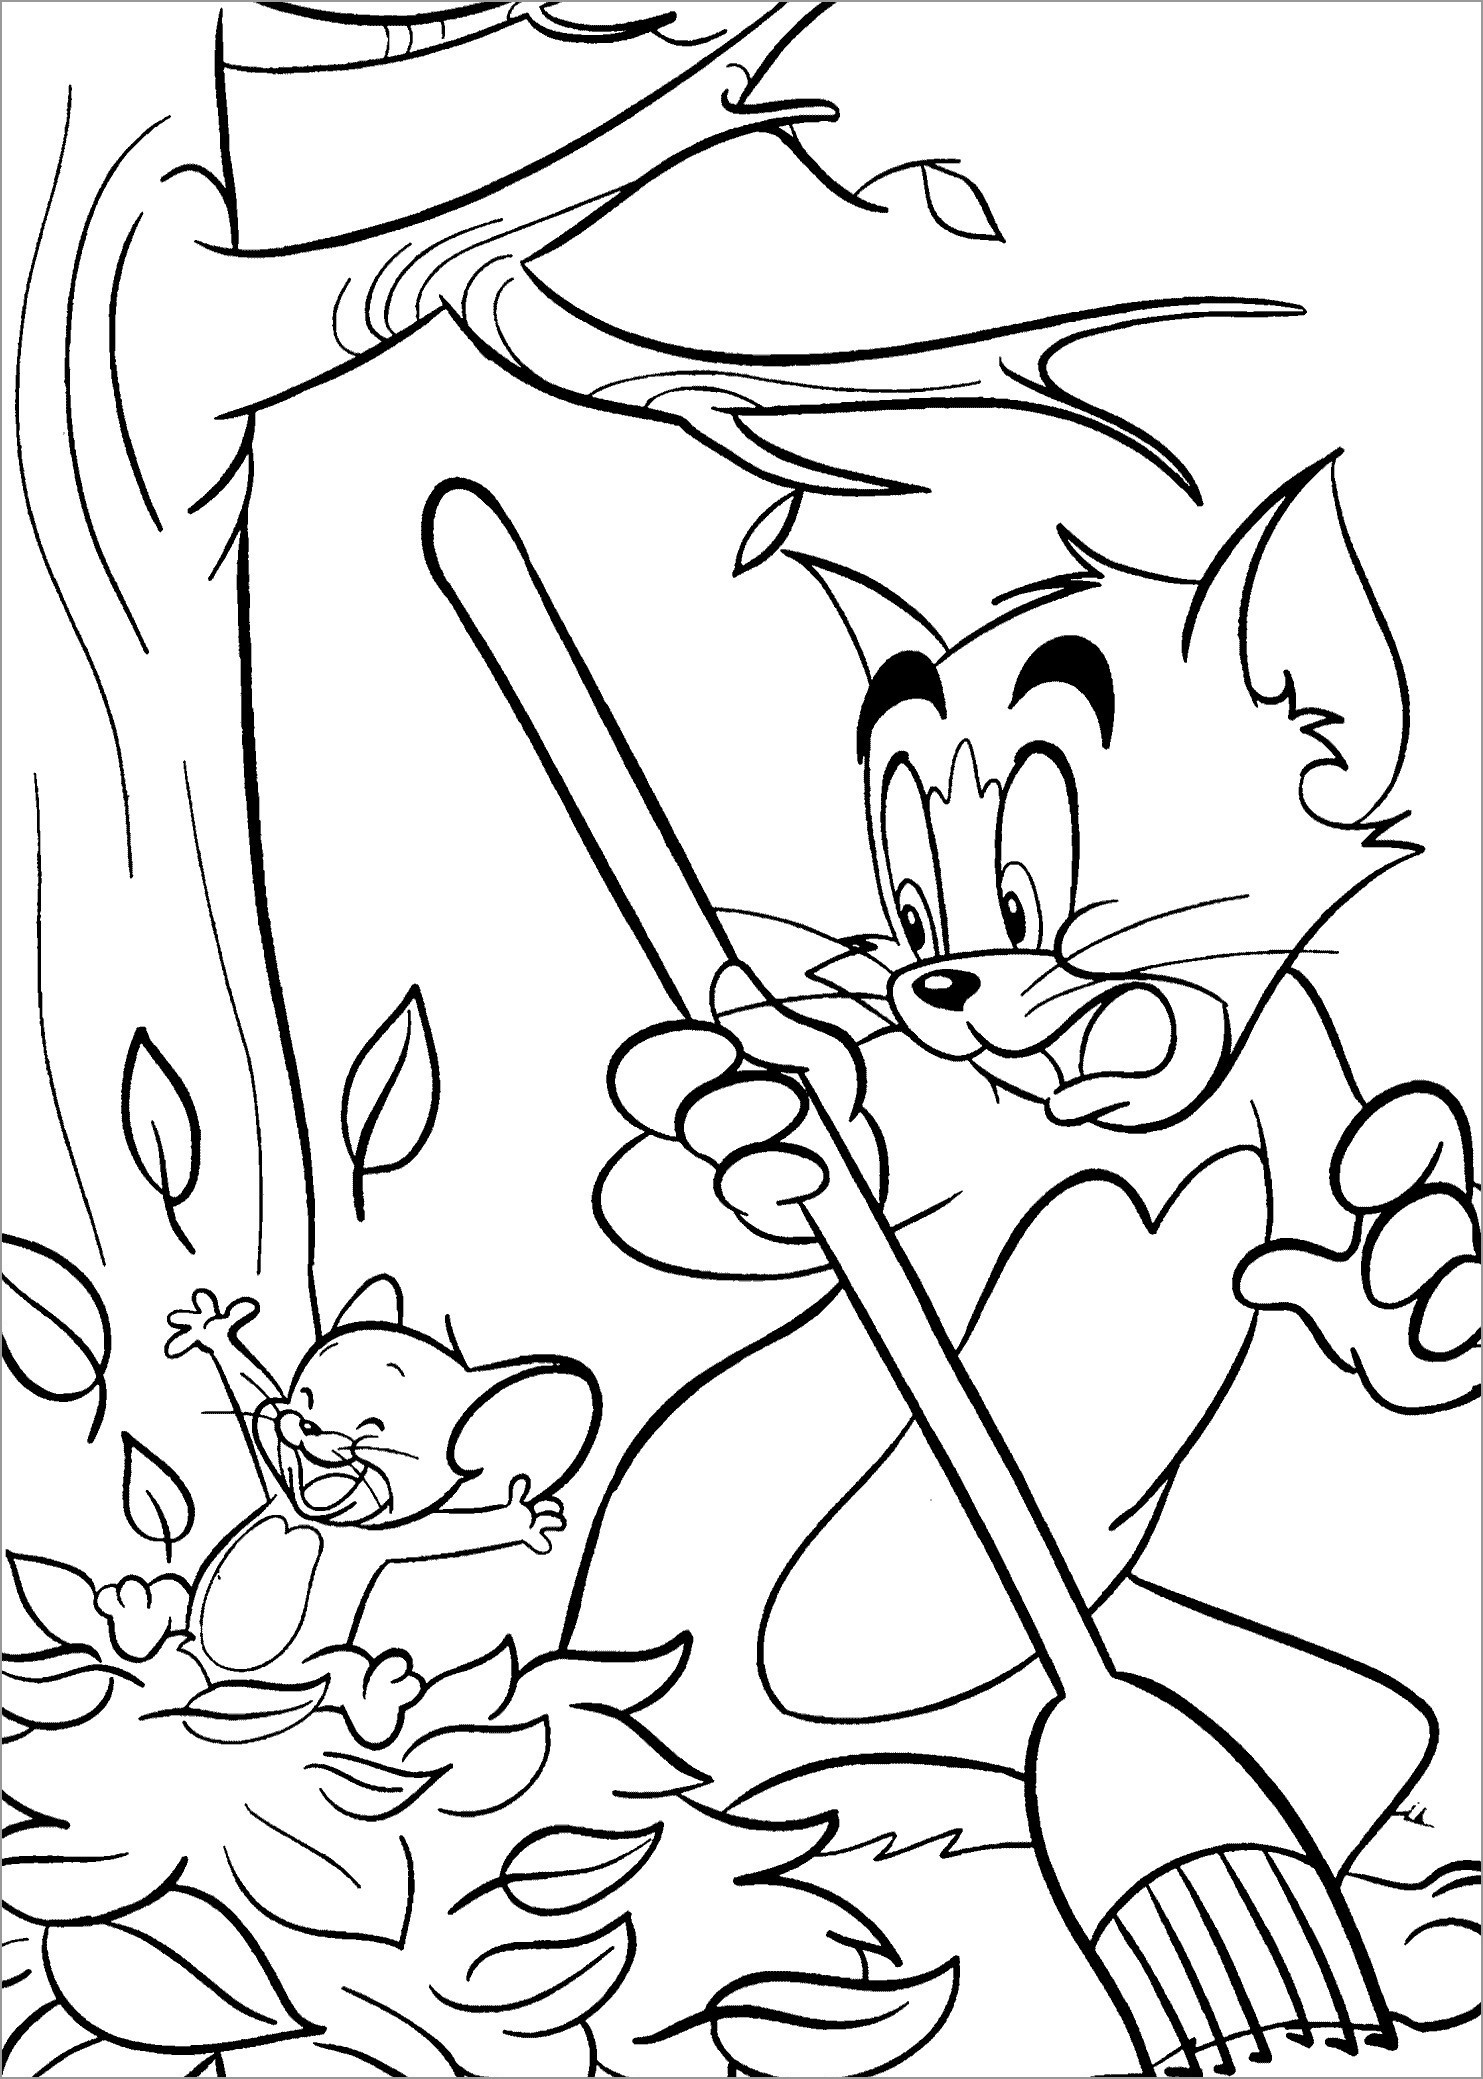 Tom and Jerry Autumn Coloring Page